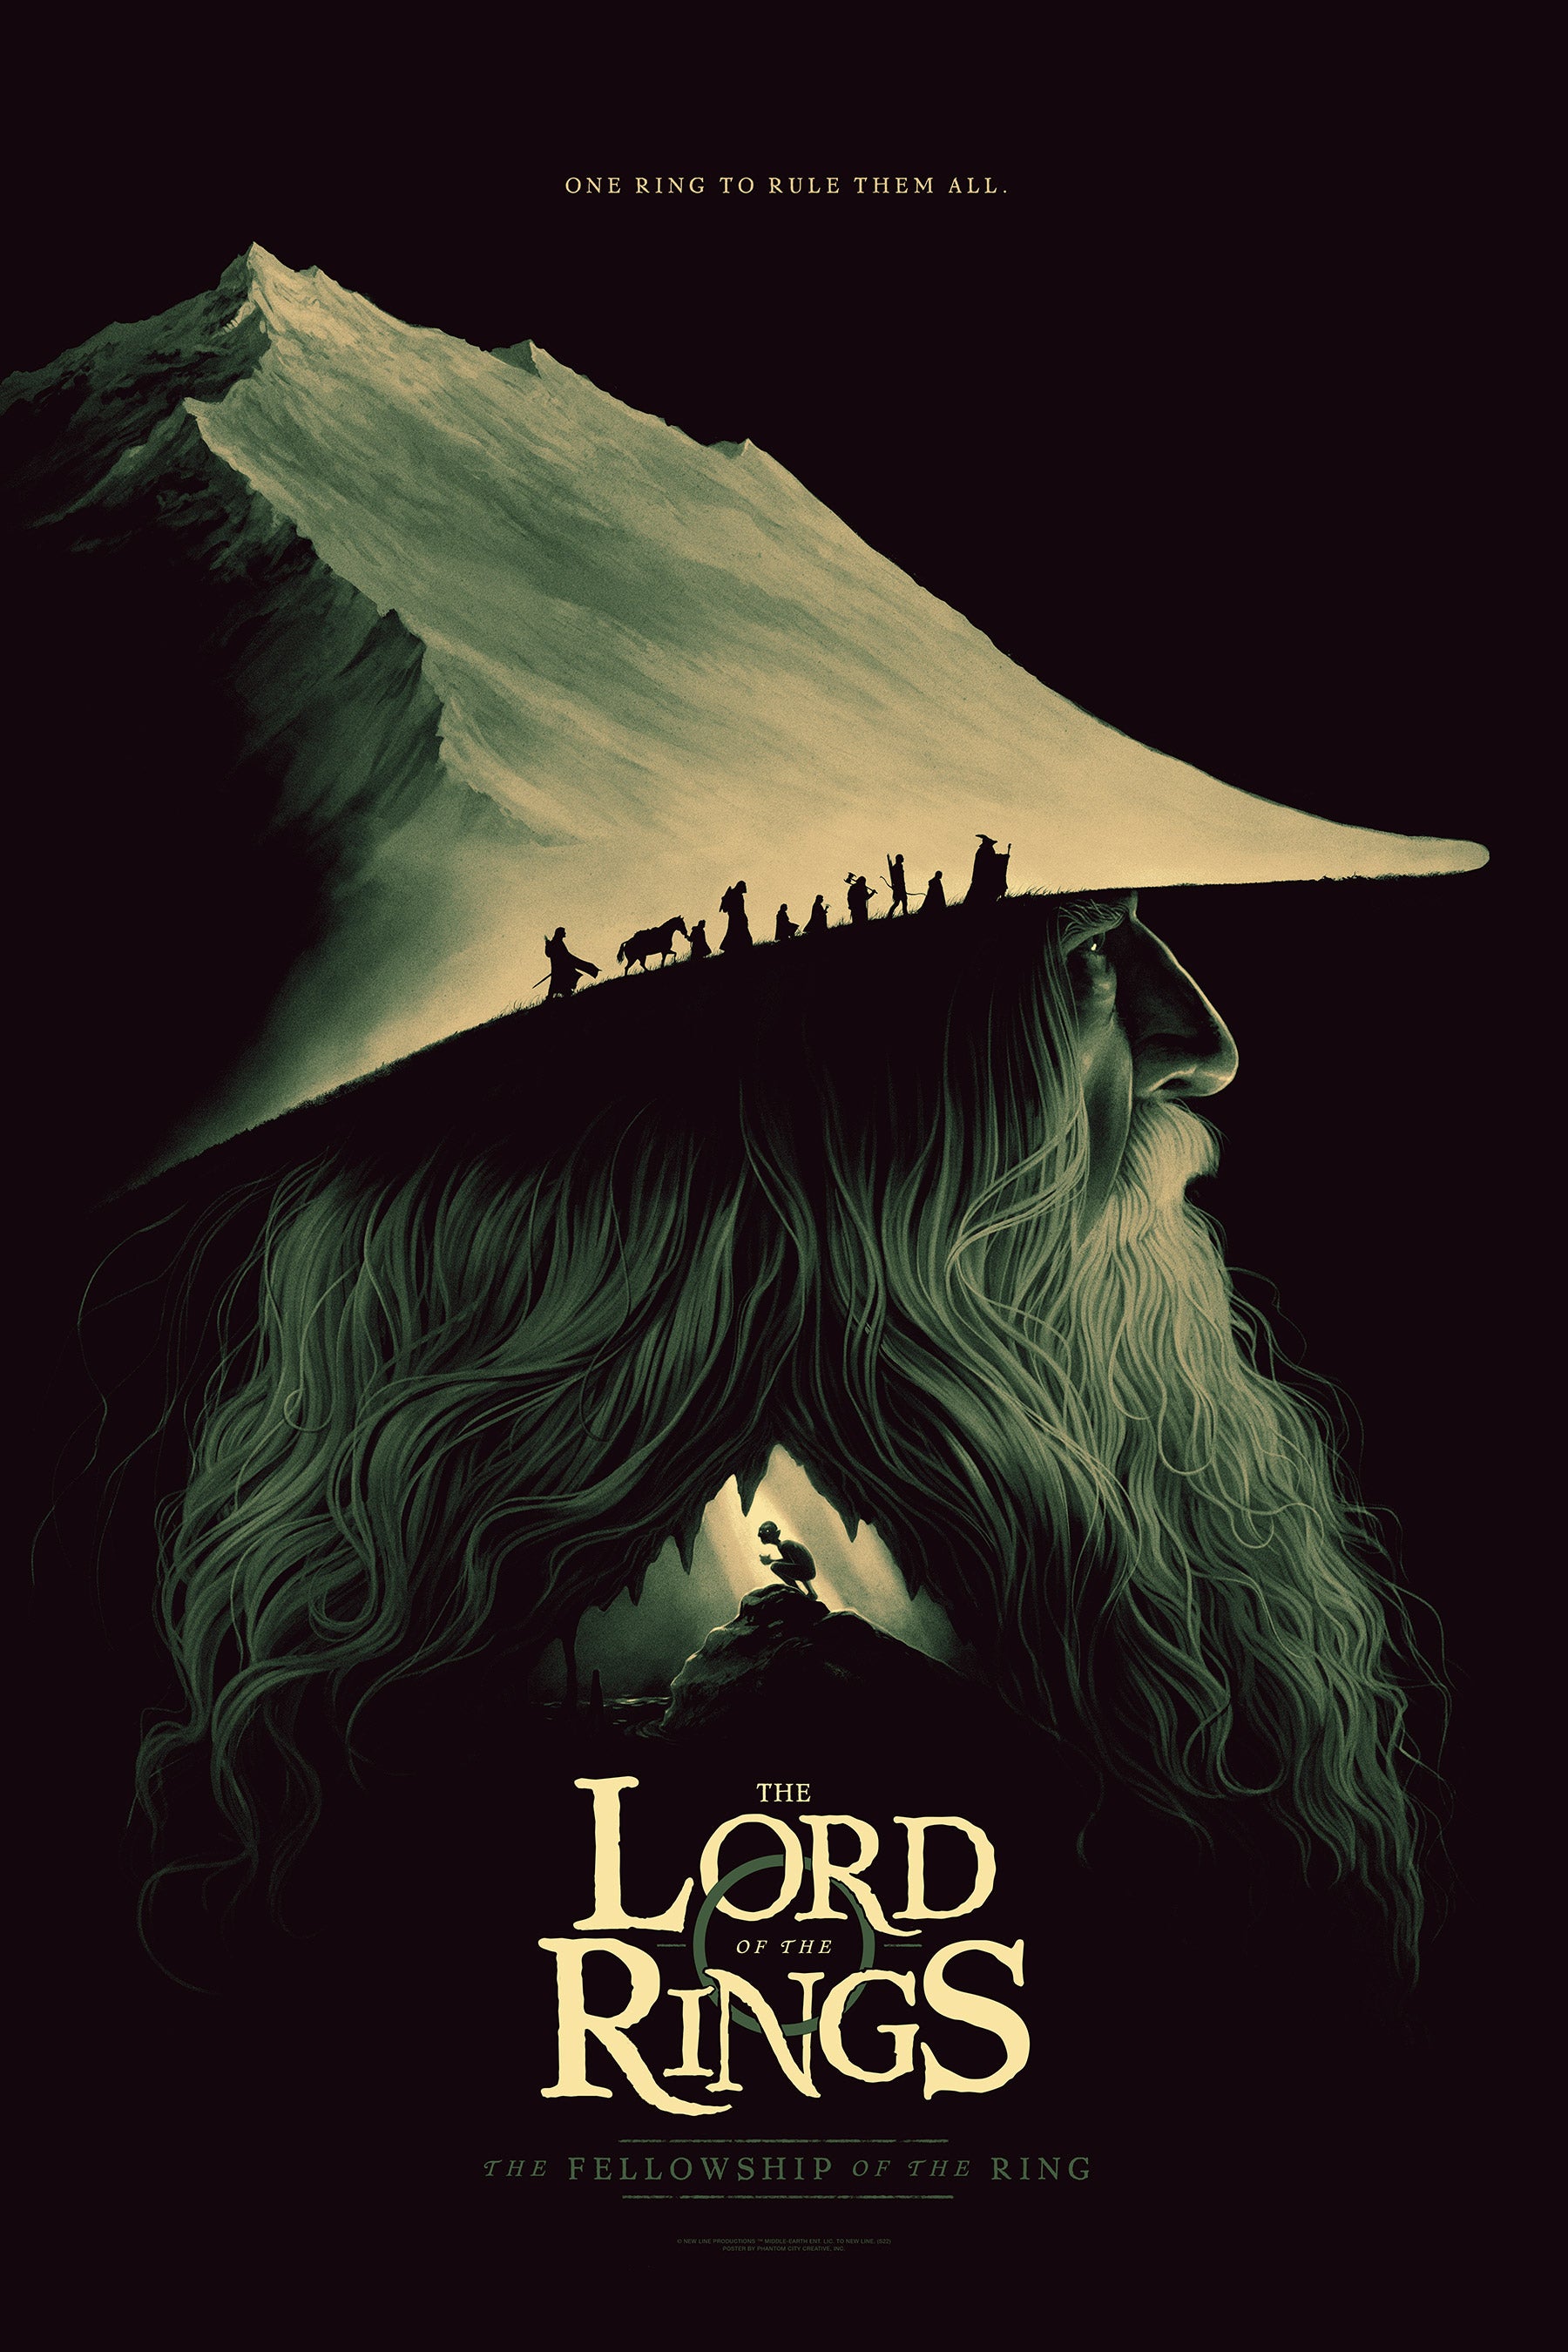 The Lord of the Rings Trilogy